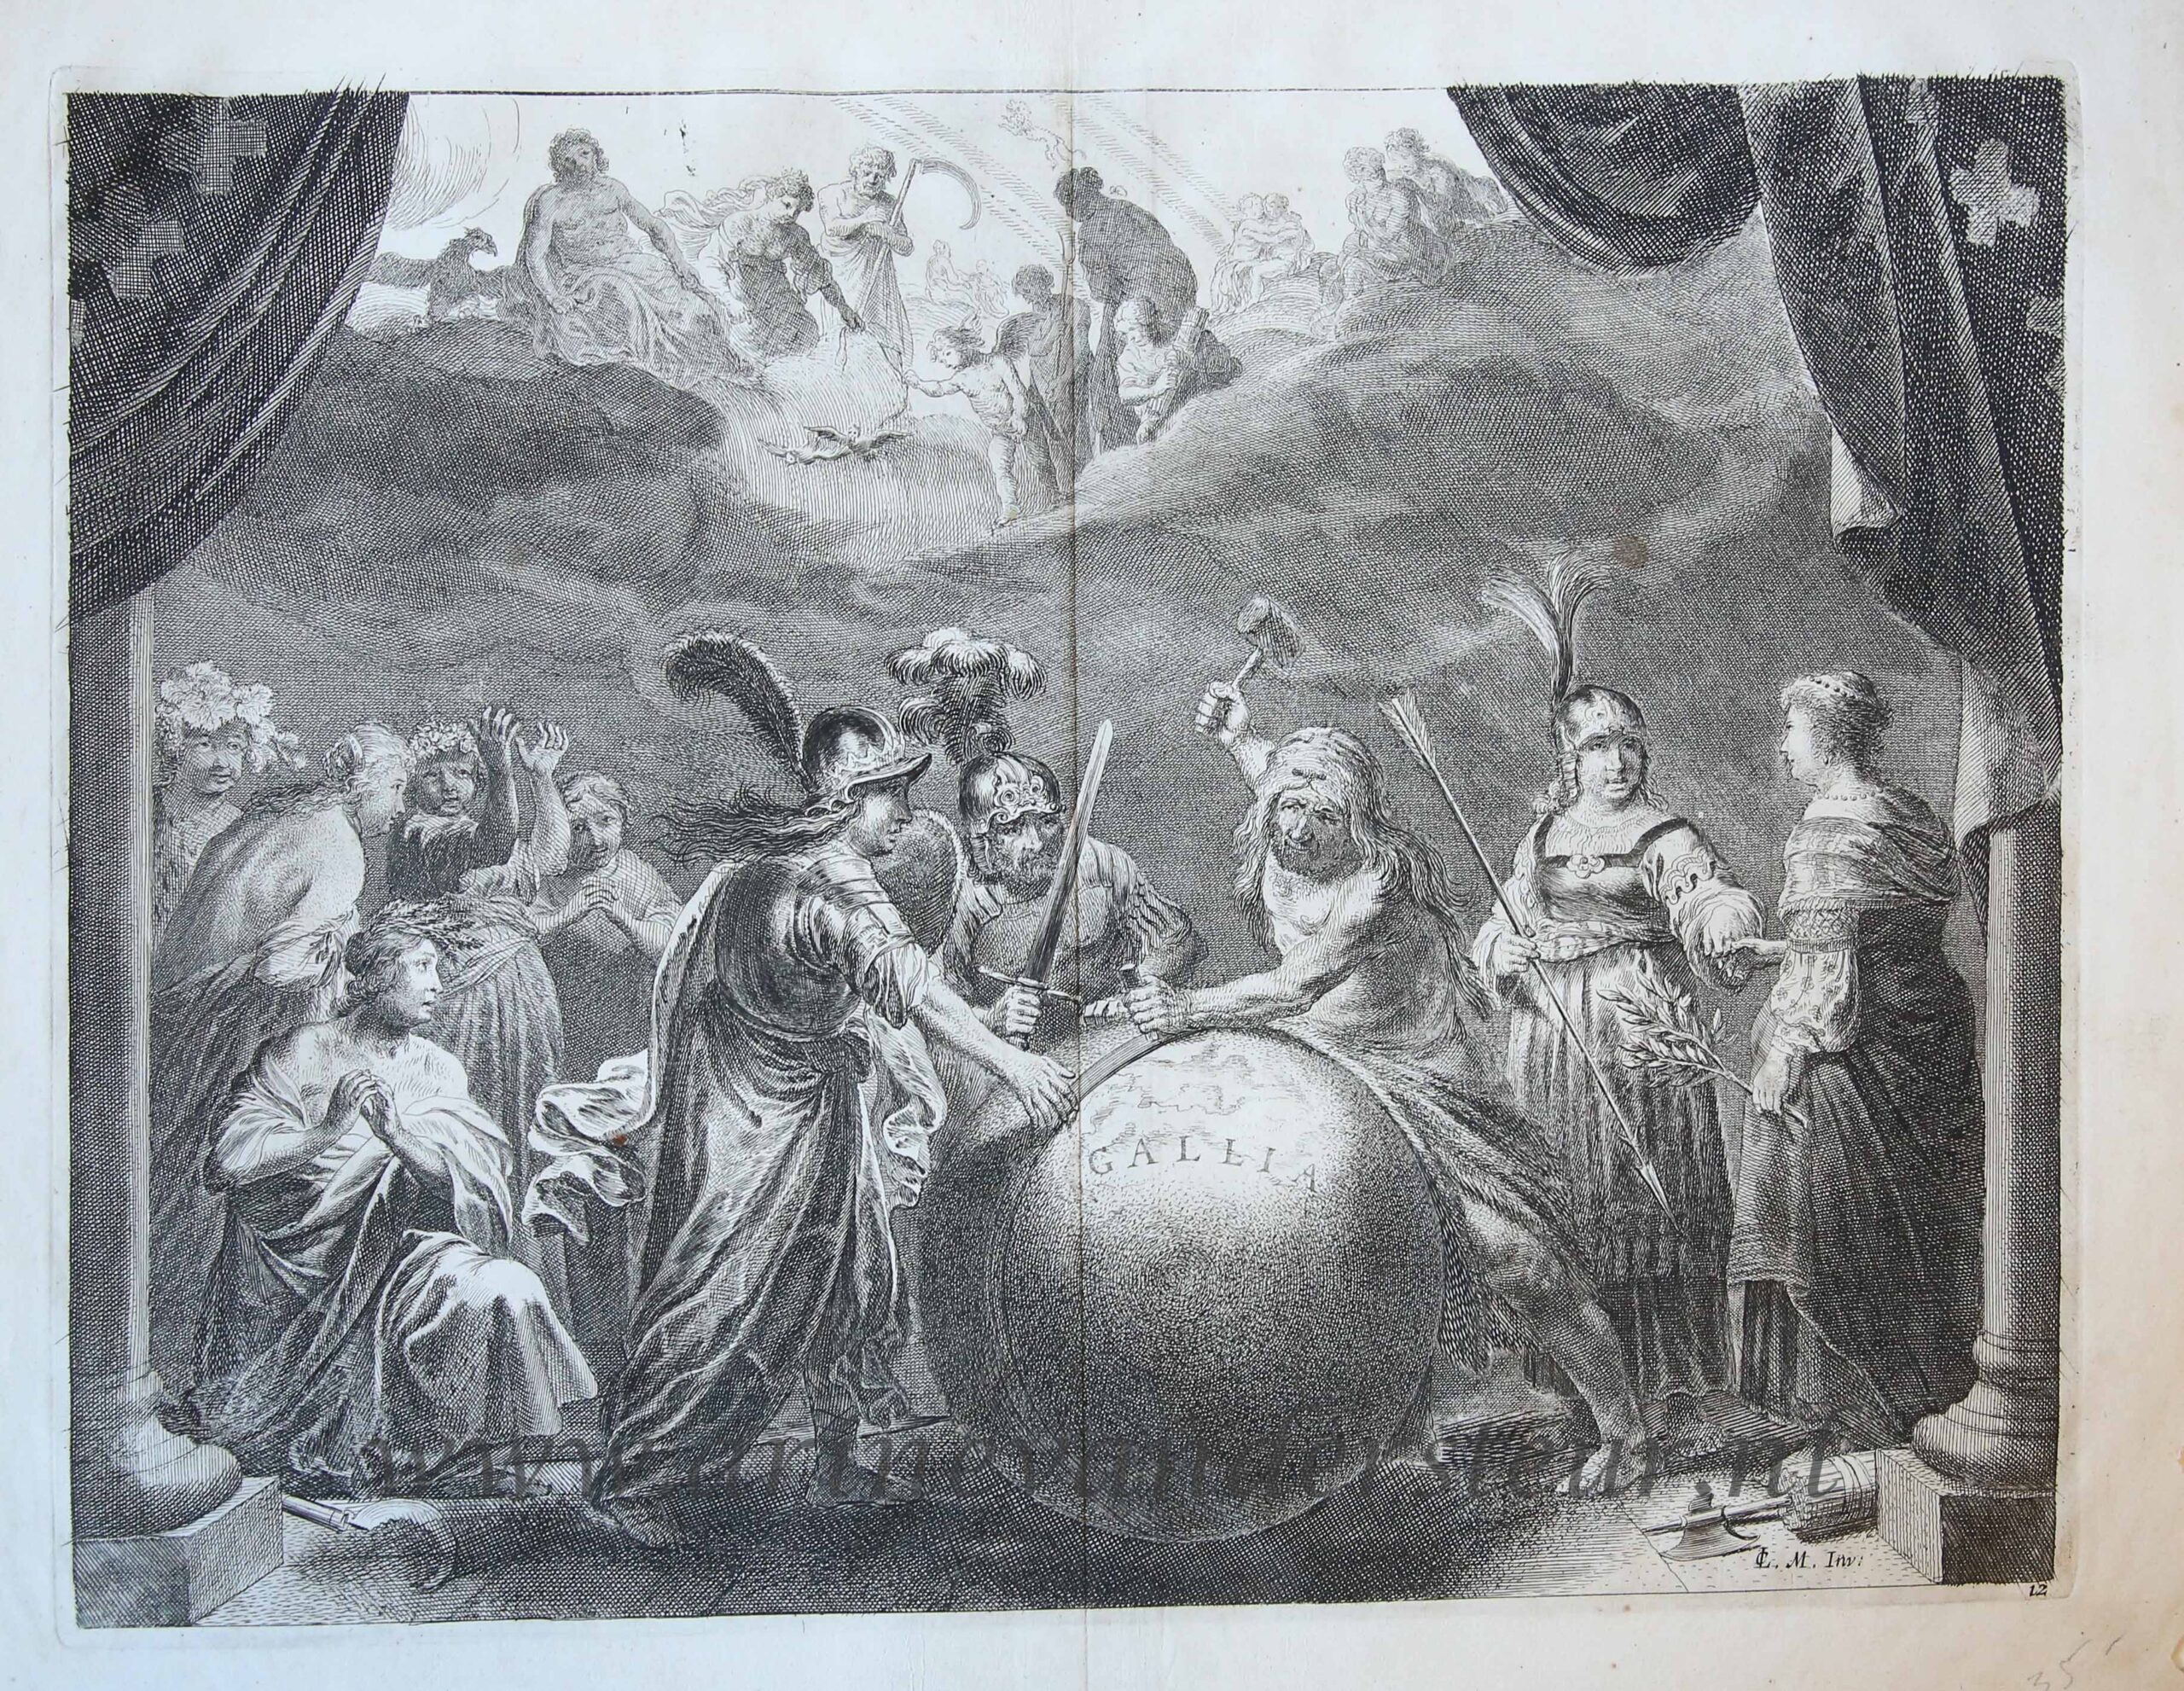 [Antique print, etching] Henry IV as Hercules repairing the broken globe representing France, published 1639.